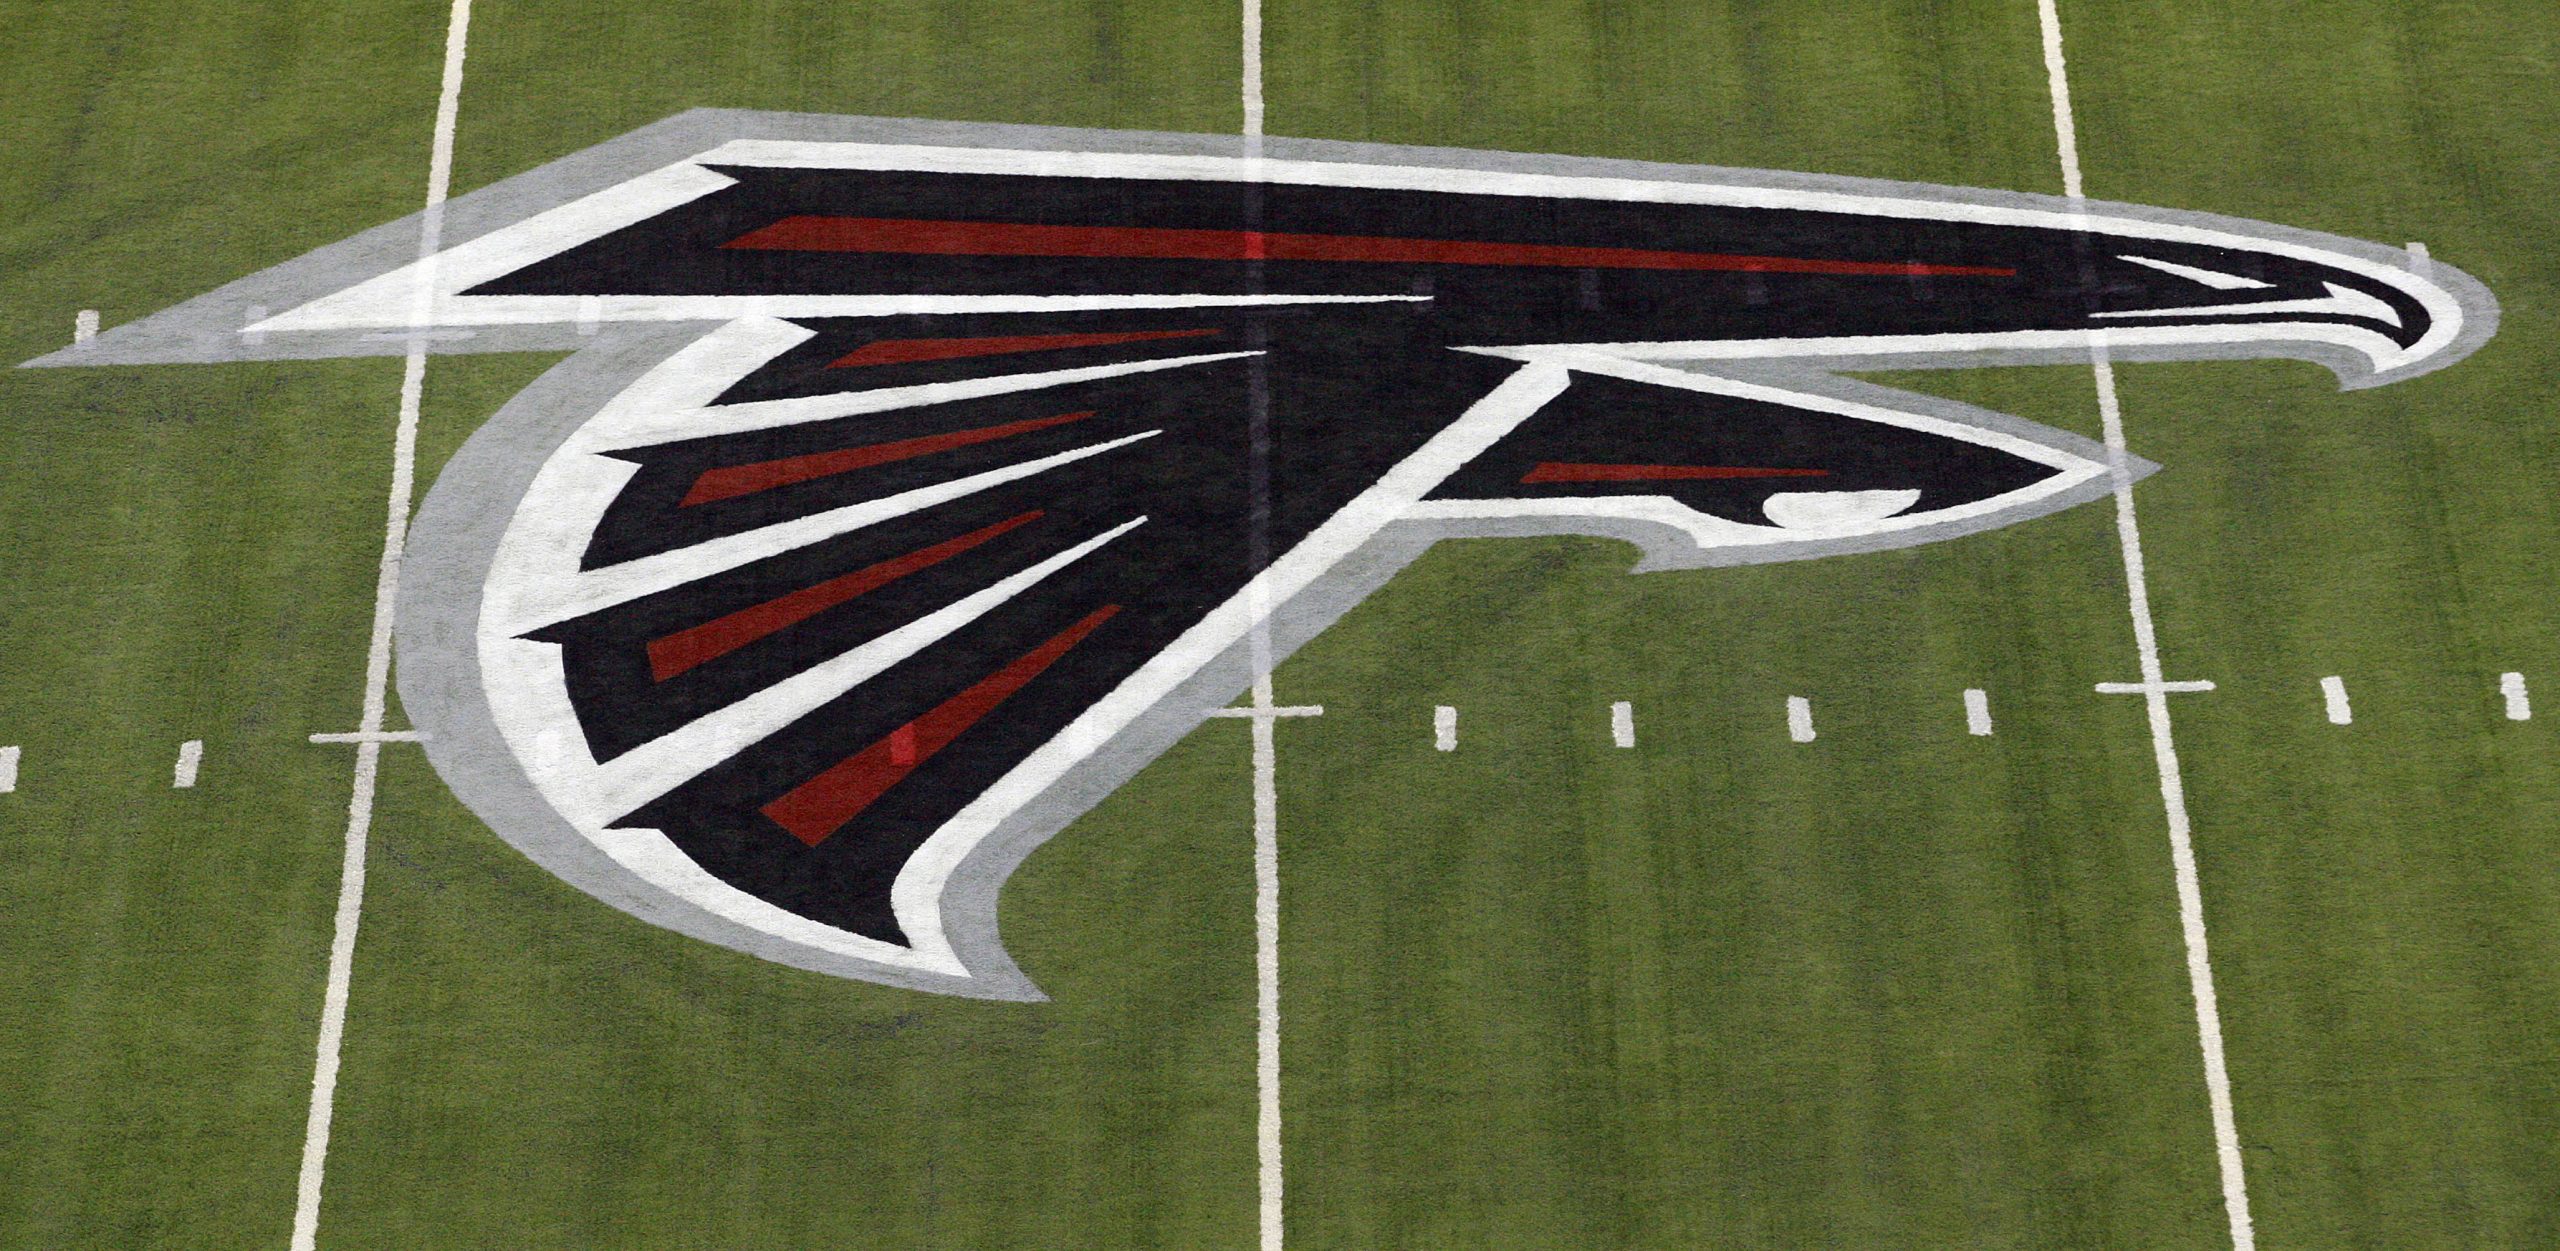 According to multiple different reports, the Atlanta Falcons cut multiple unvaccinated players in order to be the first NFL team at 100% vaccinated